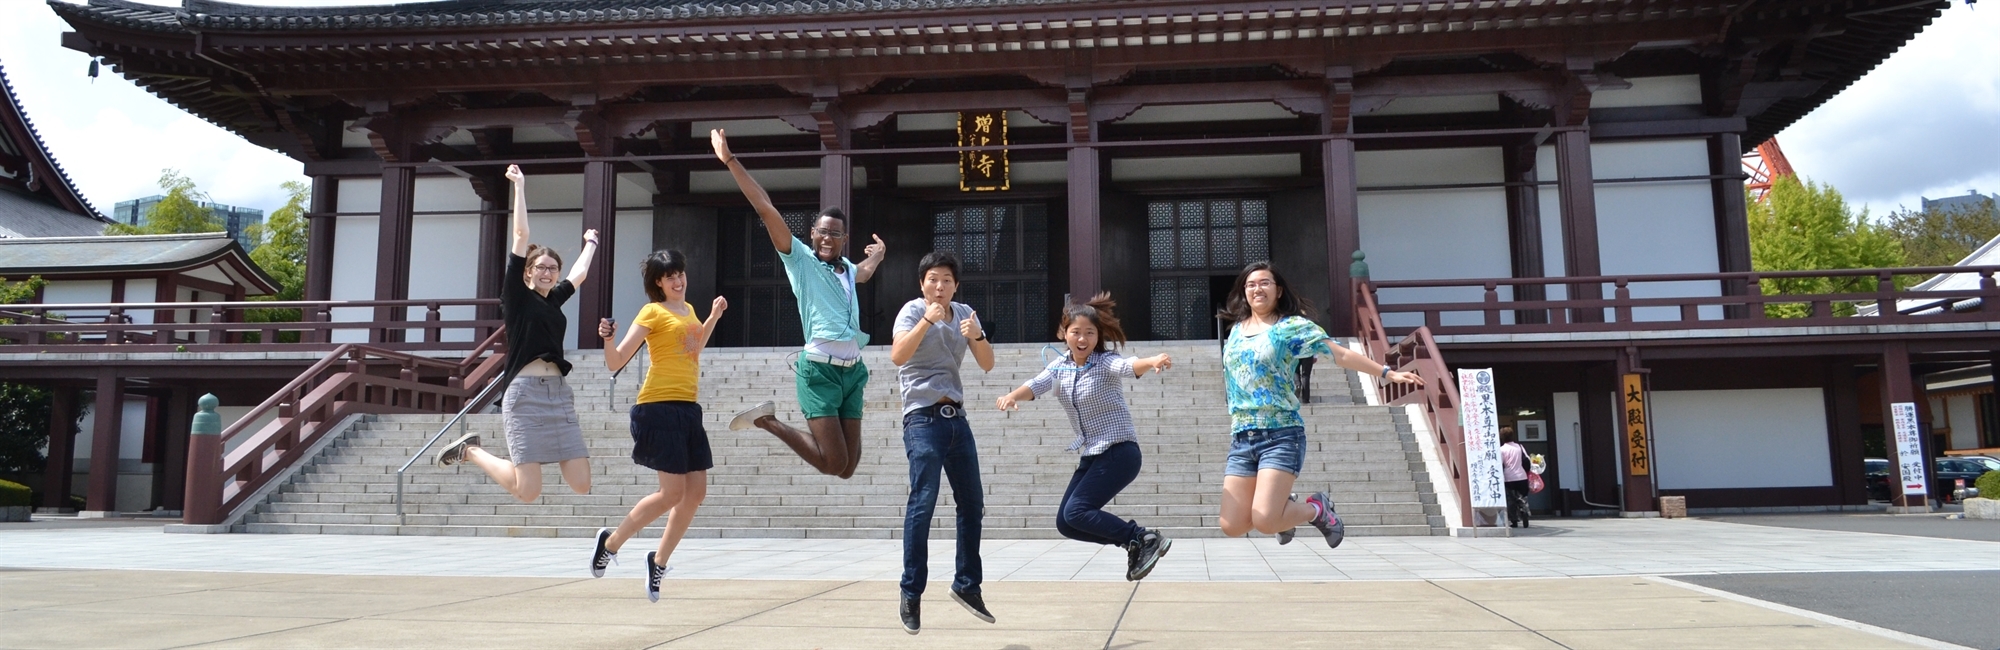 students jumping in Japan